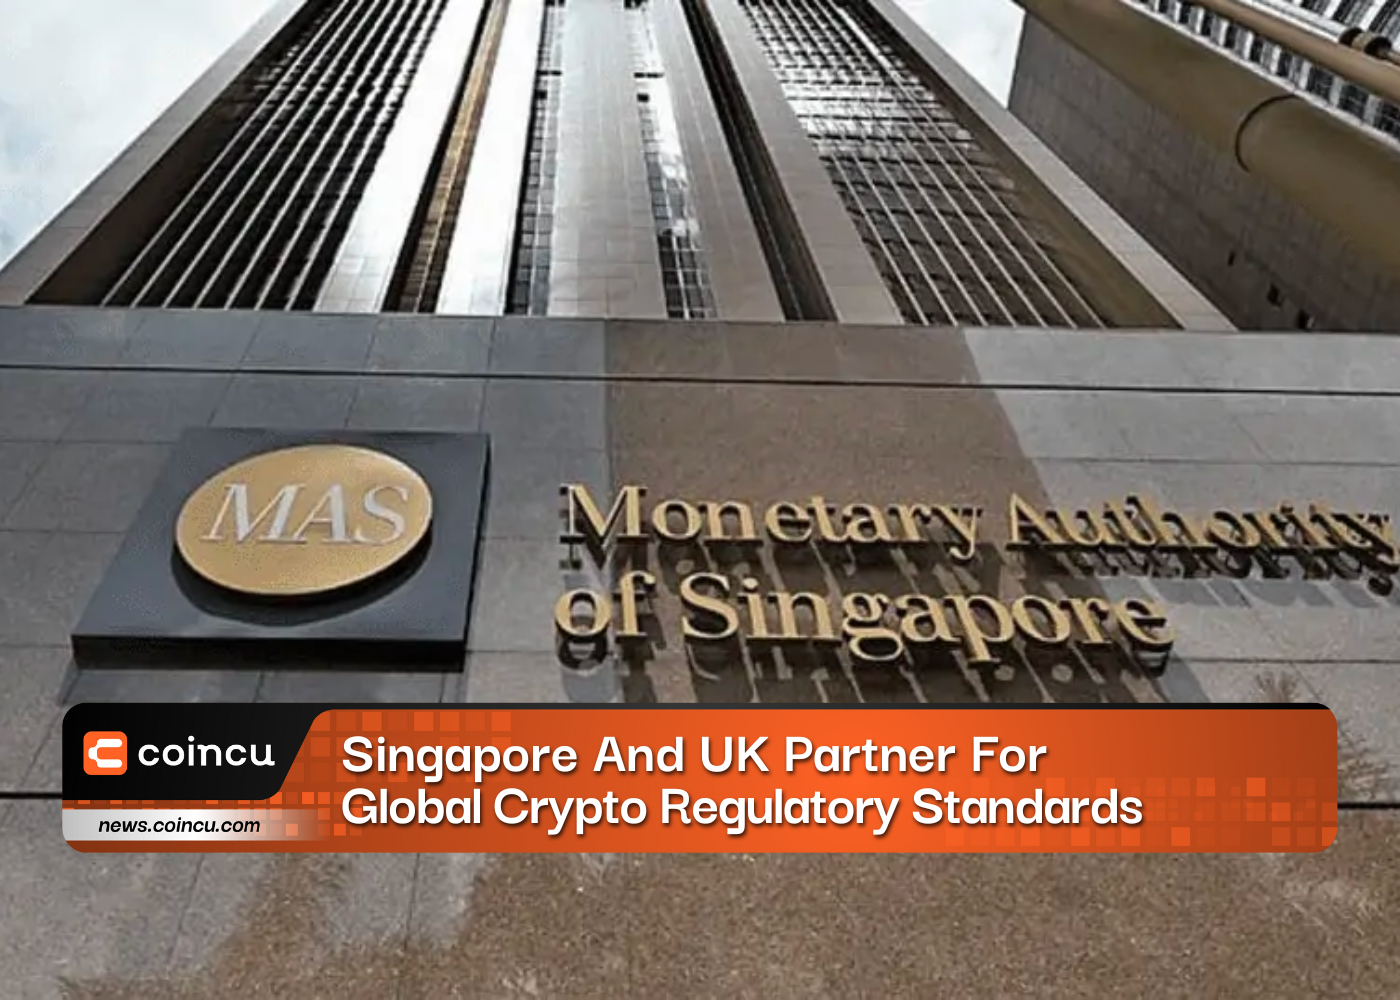 Singapore And UK Partner For